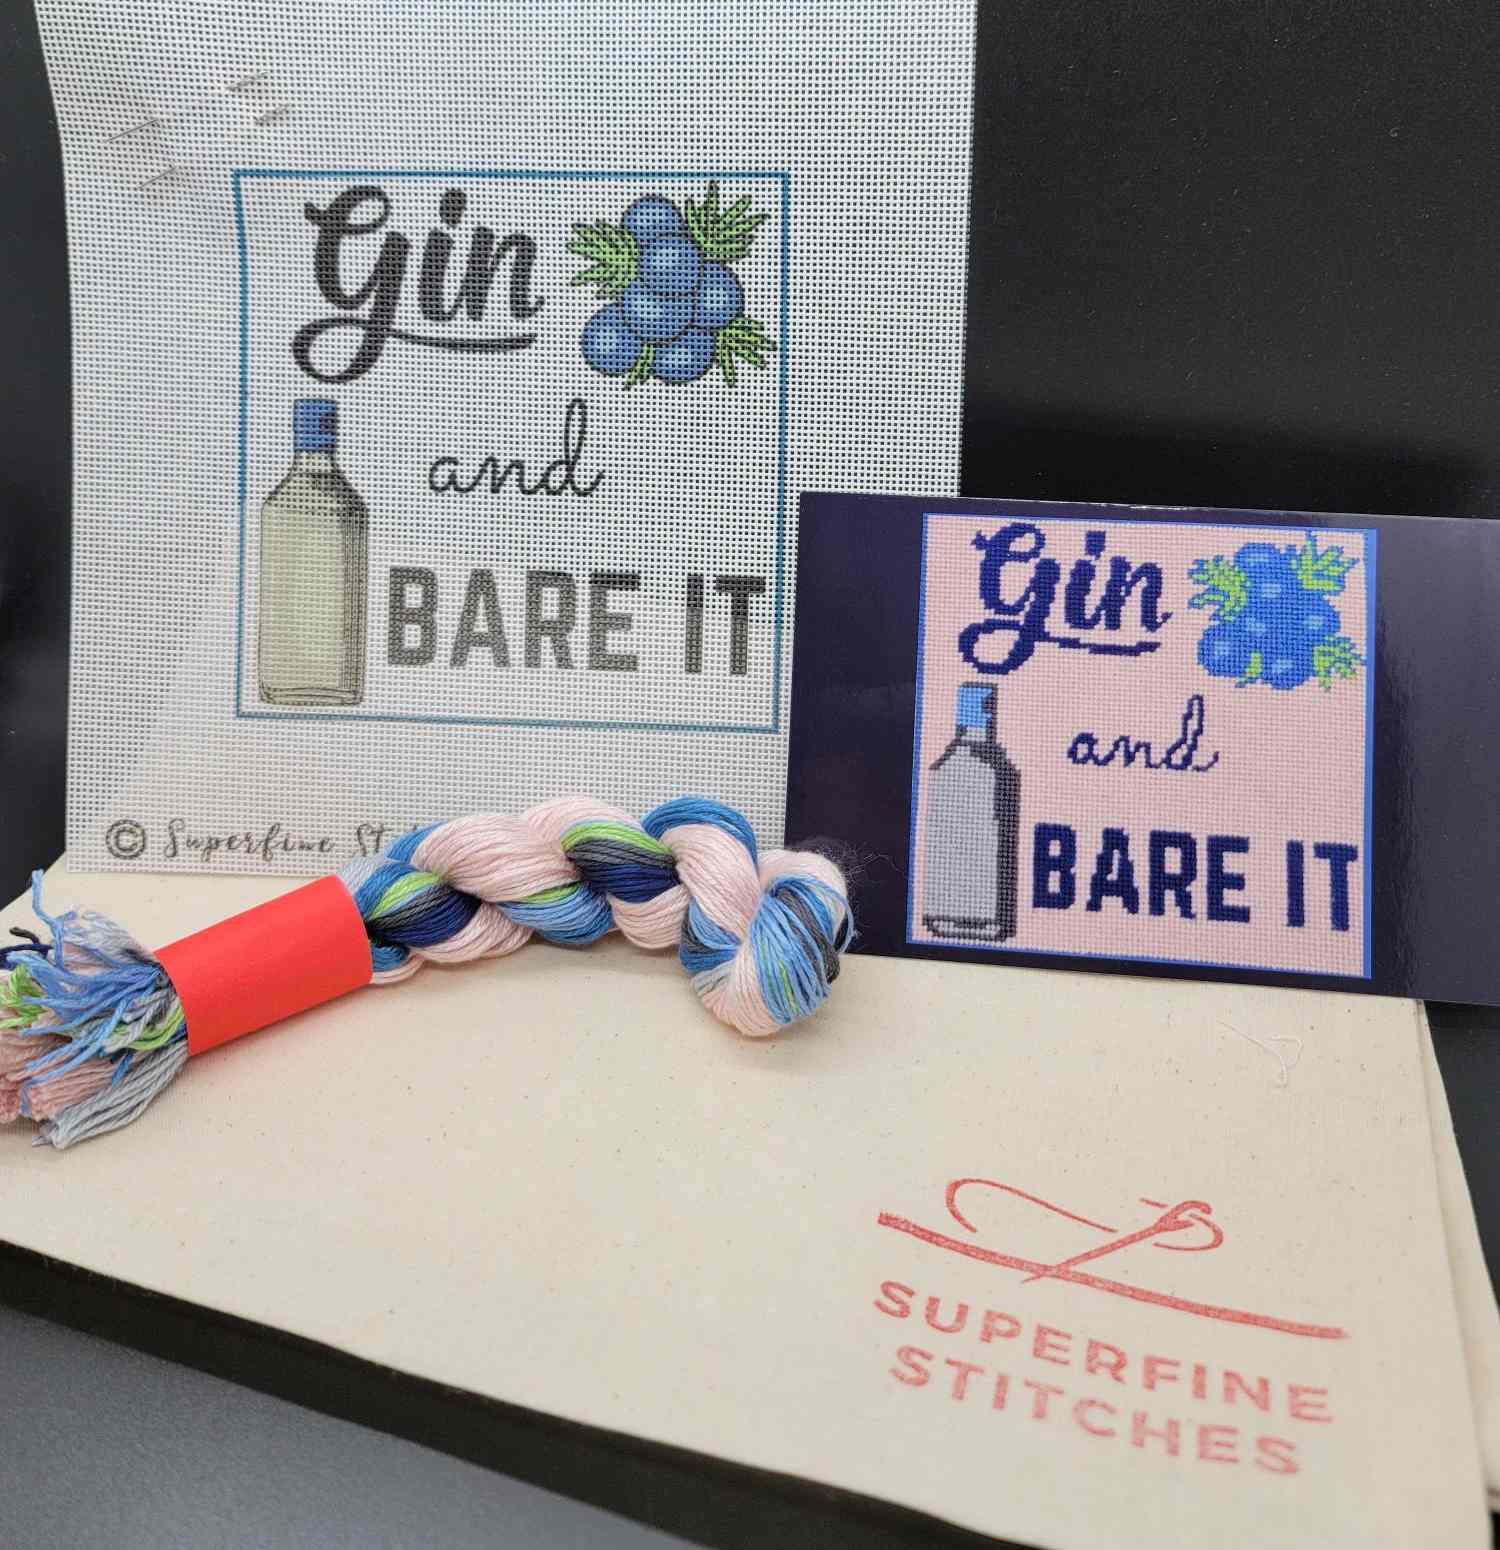 Gin and Bare It needlepoint kit.